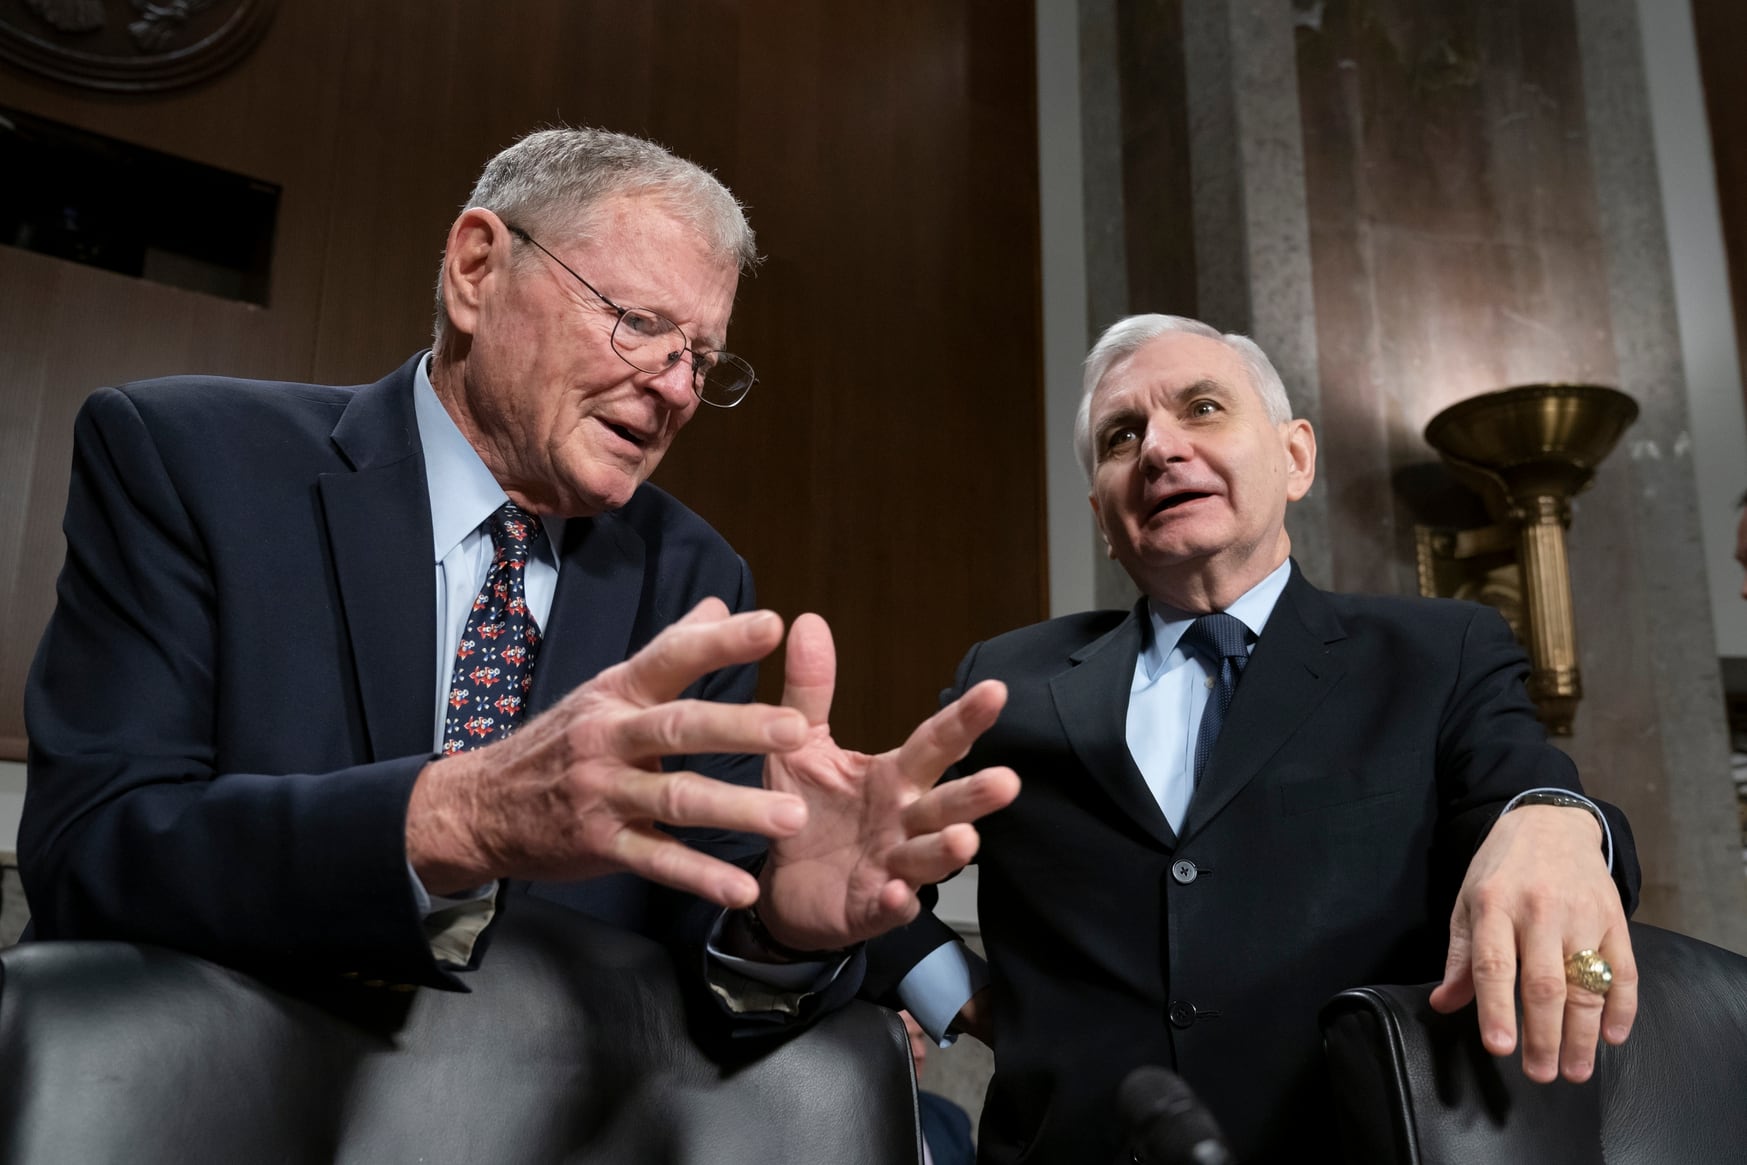 Senate Armed Services Committee Chairman Jim Inhofe, R-Okla., left, and ranking member Sen. Jack Reed, D-R.I., confer before a hearing on the Pentagon budget on March 14, 2019. (J. Scott Applewhite/AP)